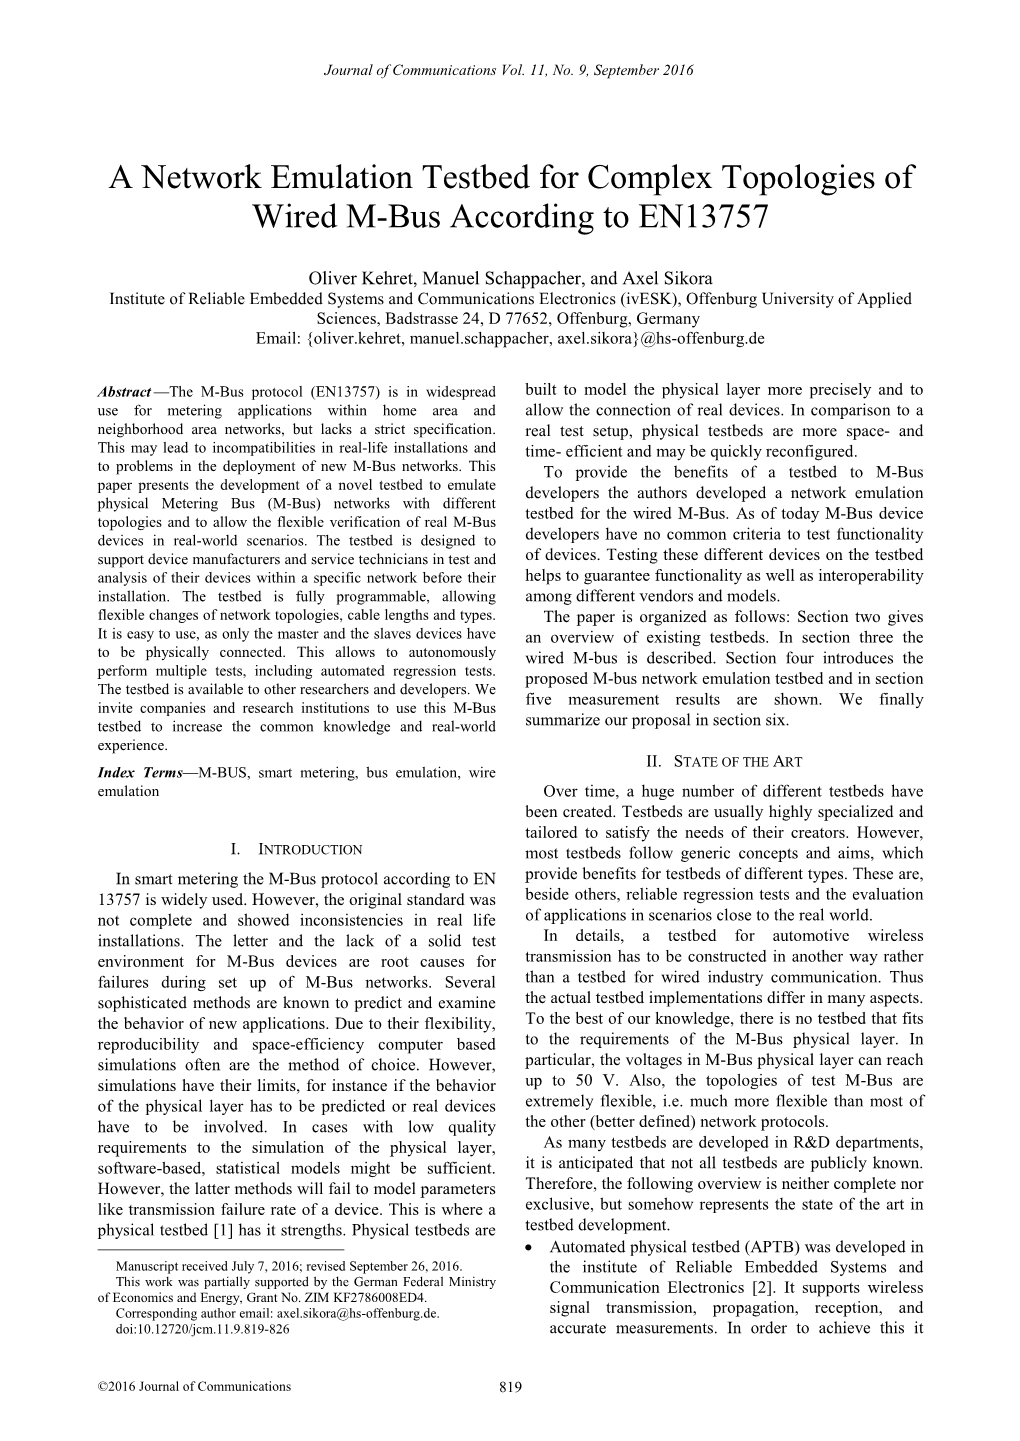 A Network Emulation Testbed for Complex Topologies of Wired M-Bus According to EN13757